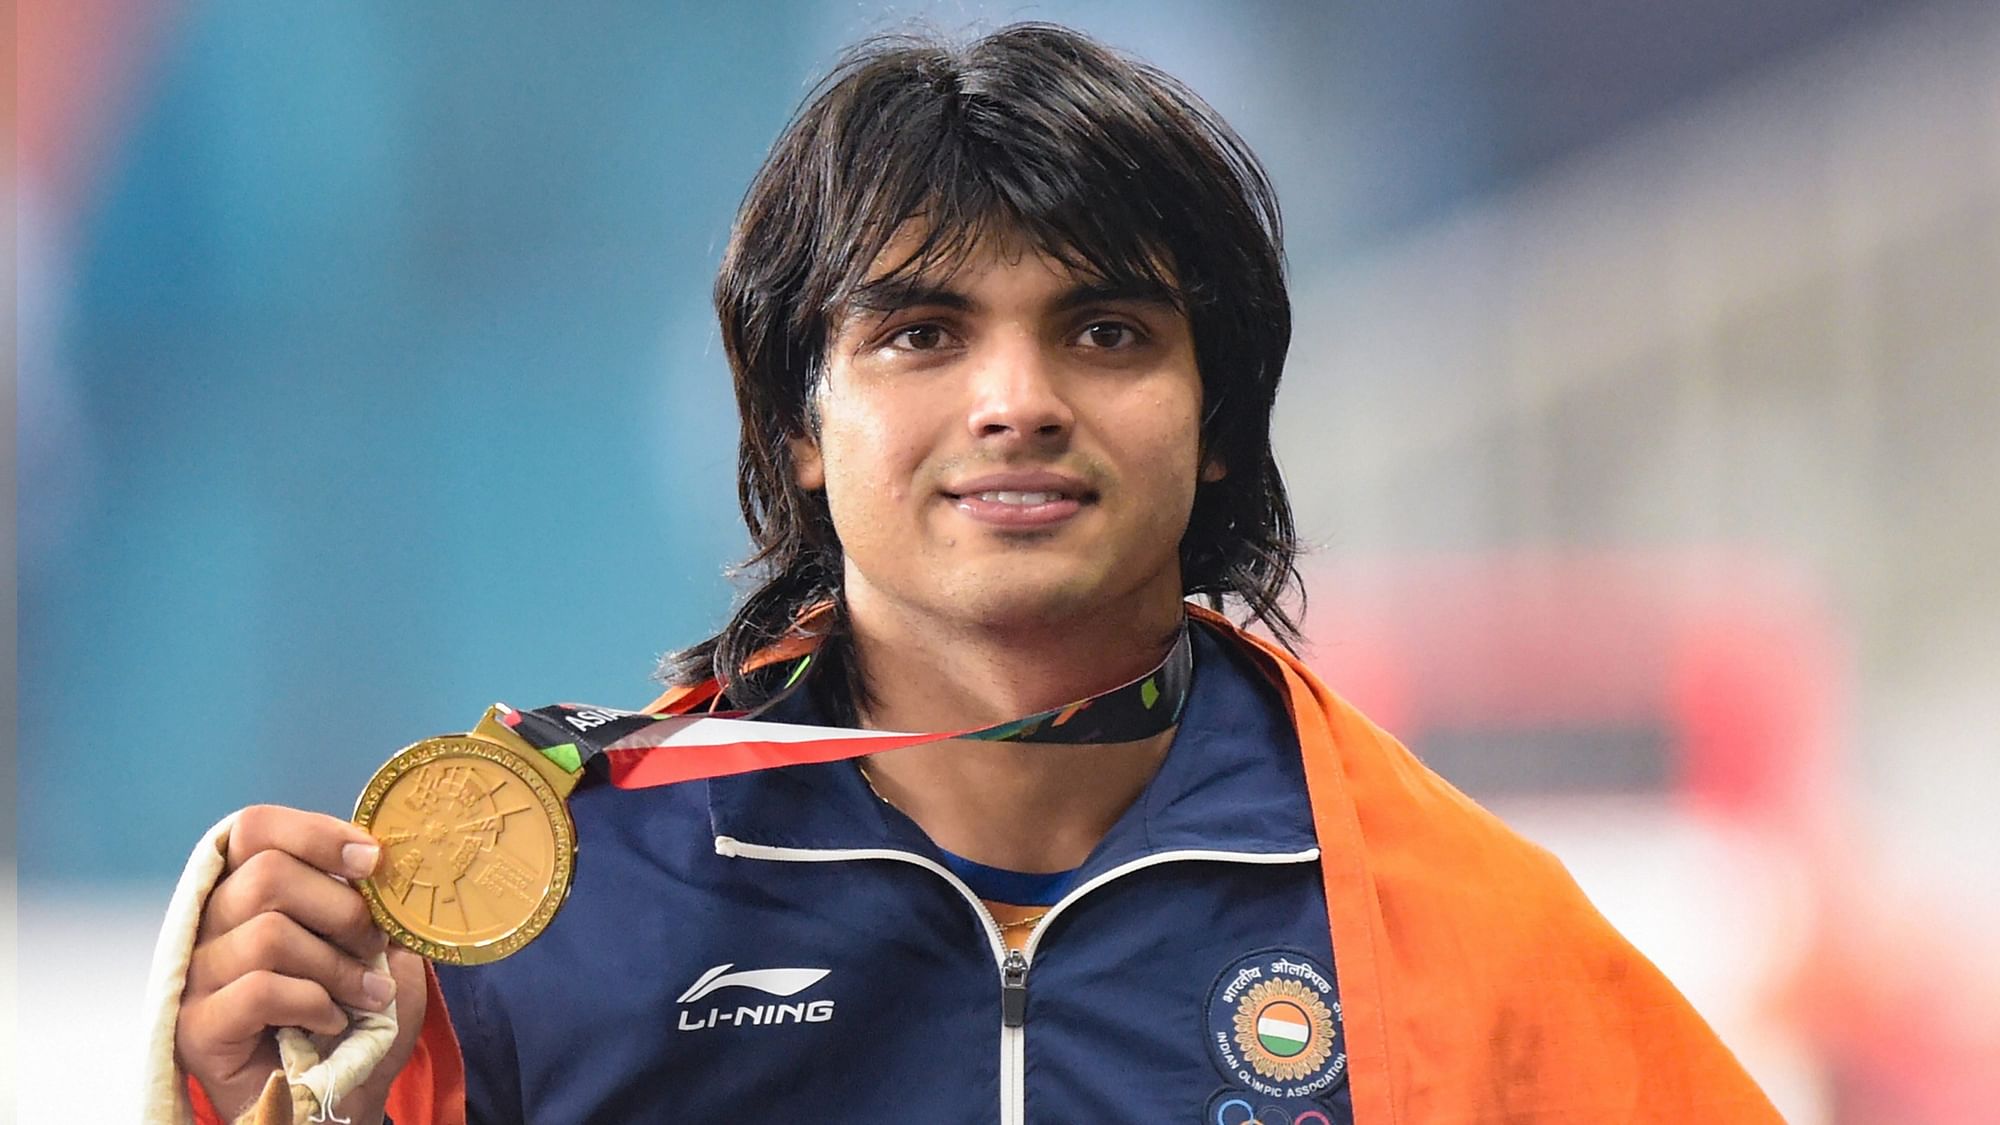 Neeraj Chopra had qualified for the Tokyo 2020 Olympics with a throw of 87.86m at the Athletics Central North East meeting in South Africa.